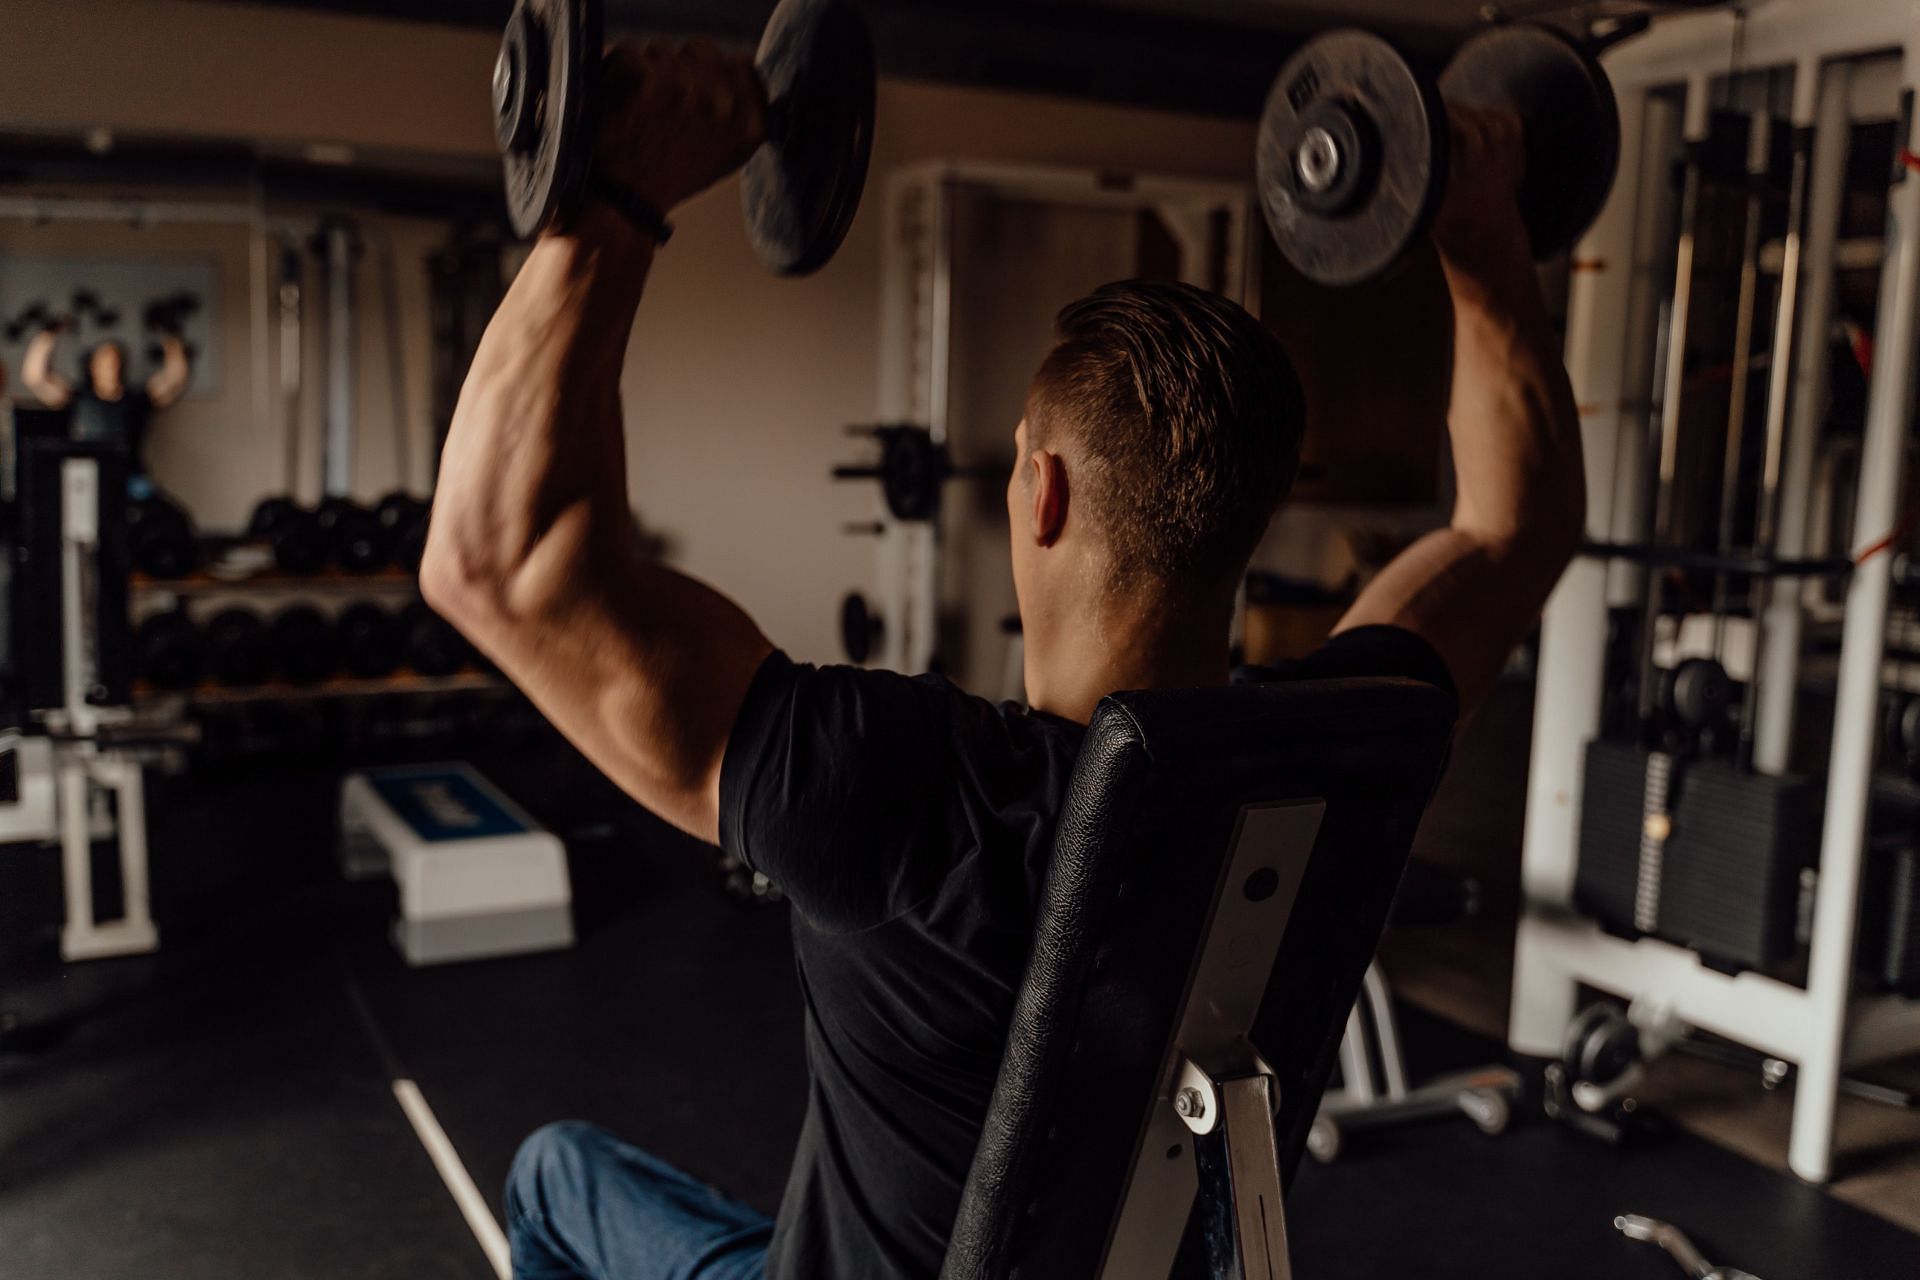 Get Bigger Triceps With the Skull Crusher Workout / Image by Alesia Kozik - Pexels